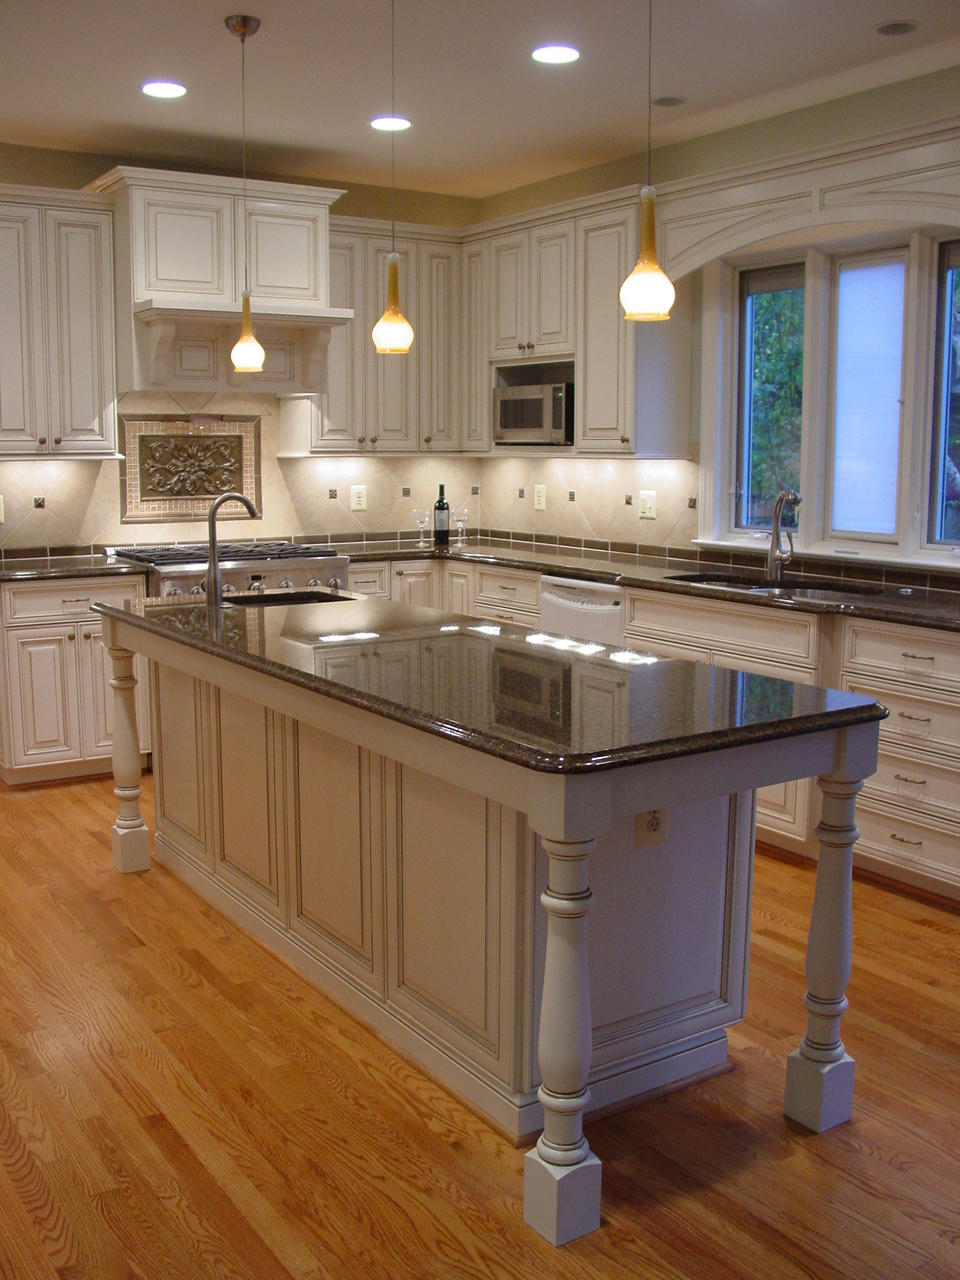 Kitchen Trends for 2015 Discounters